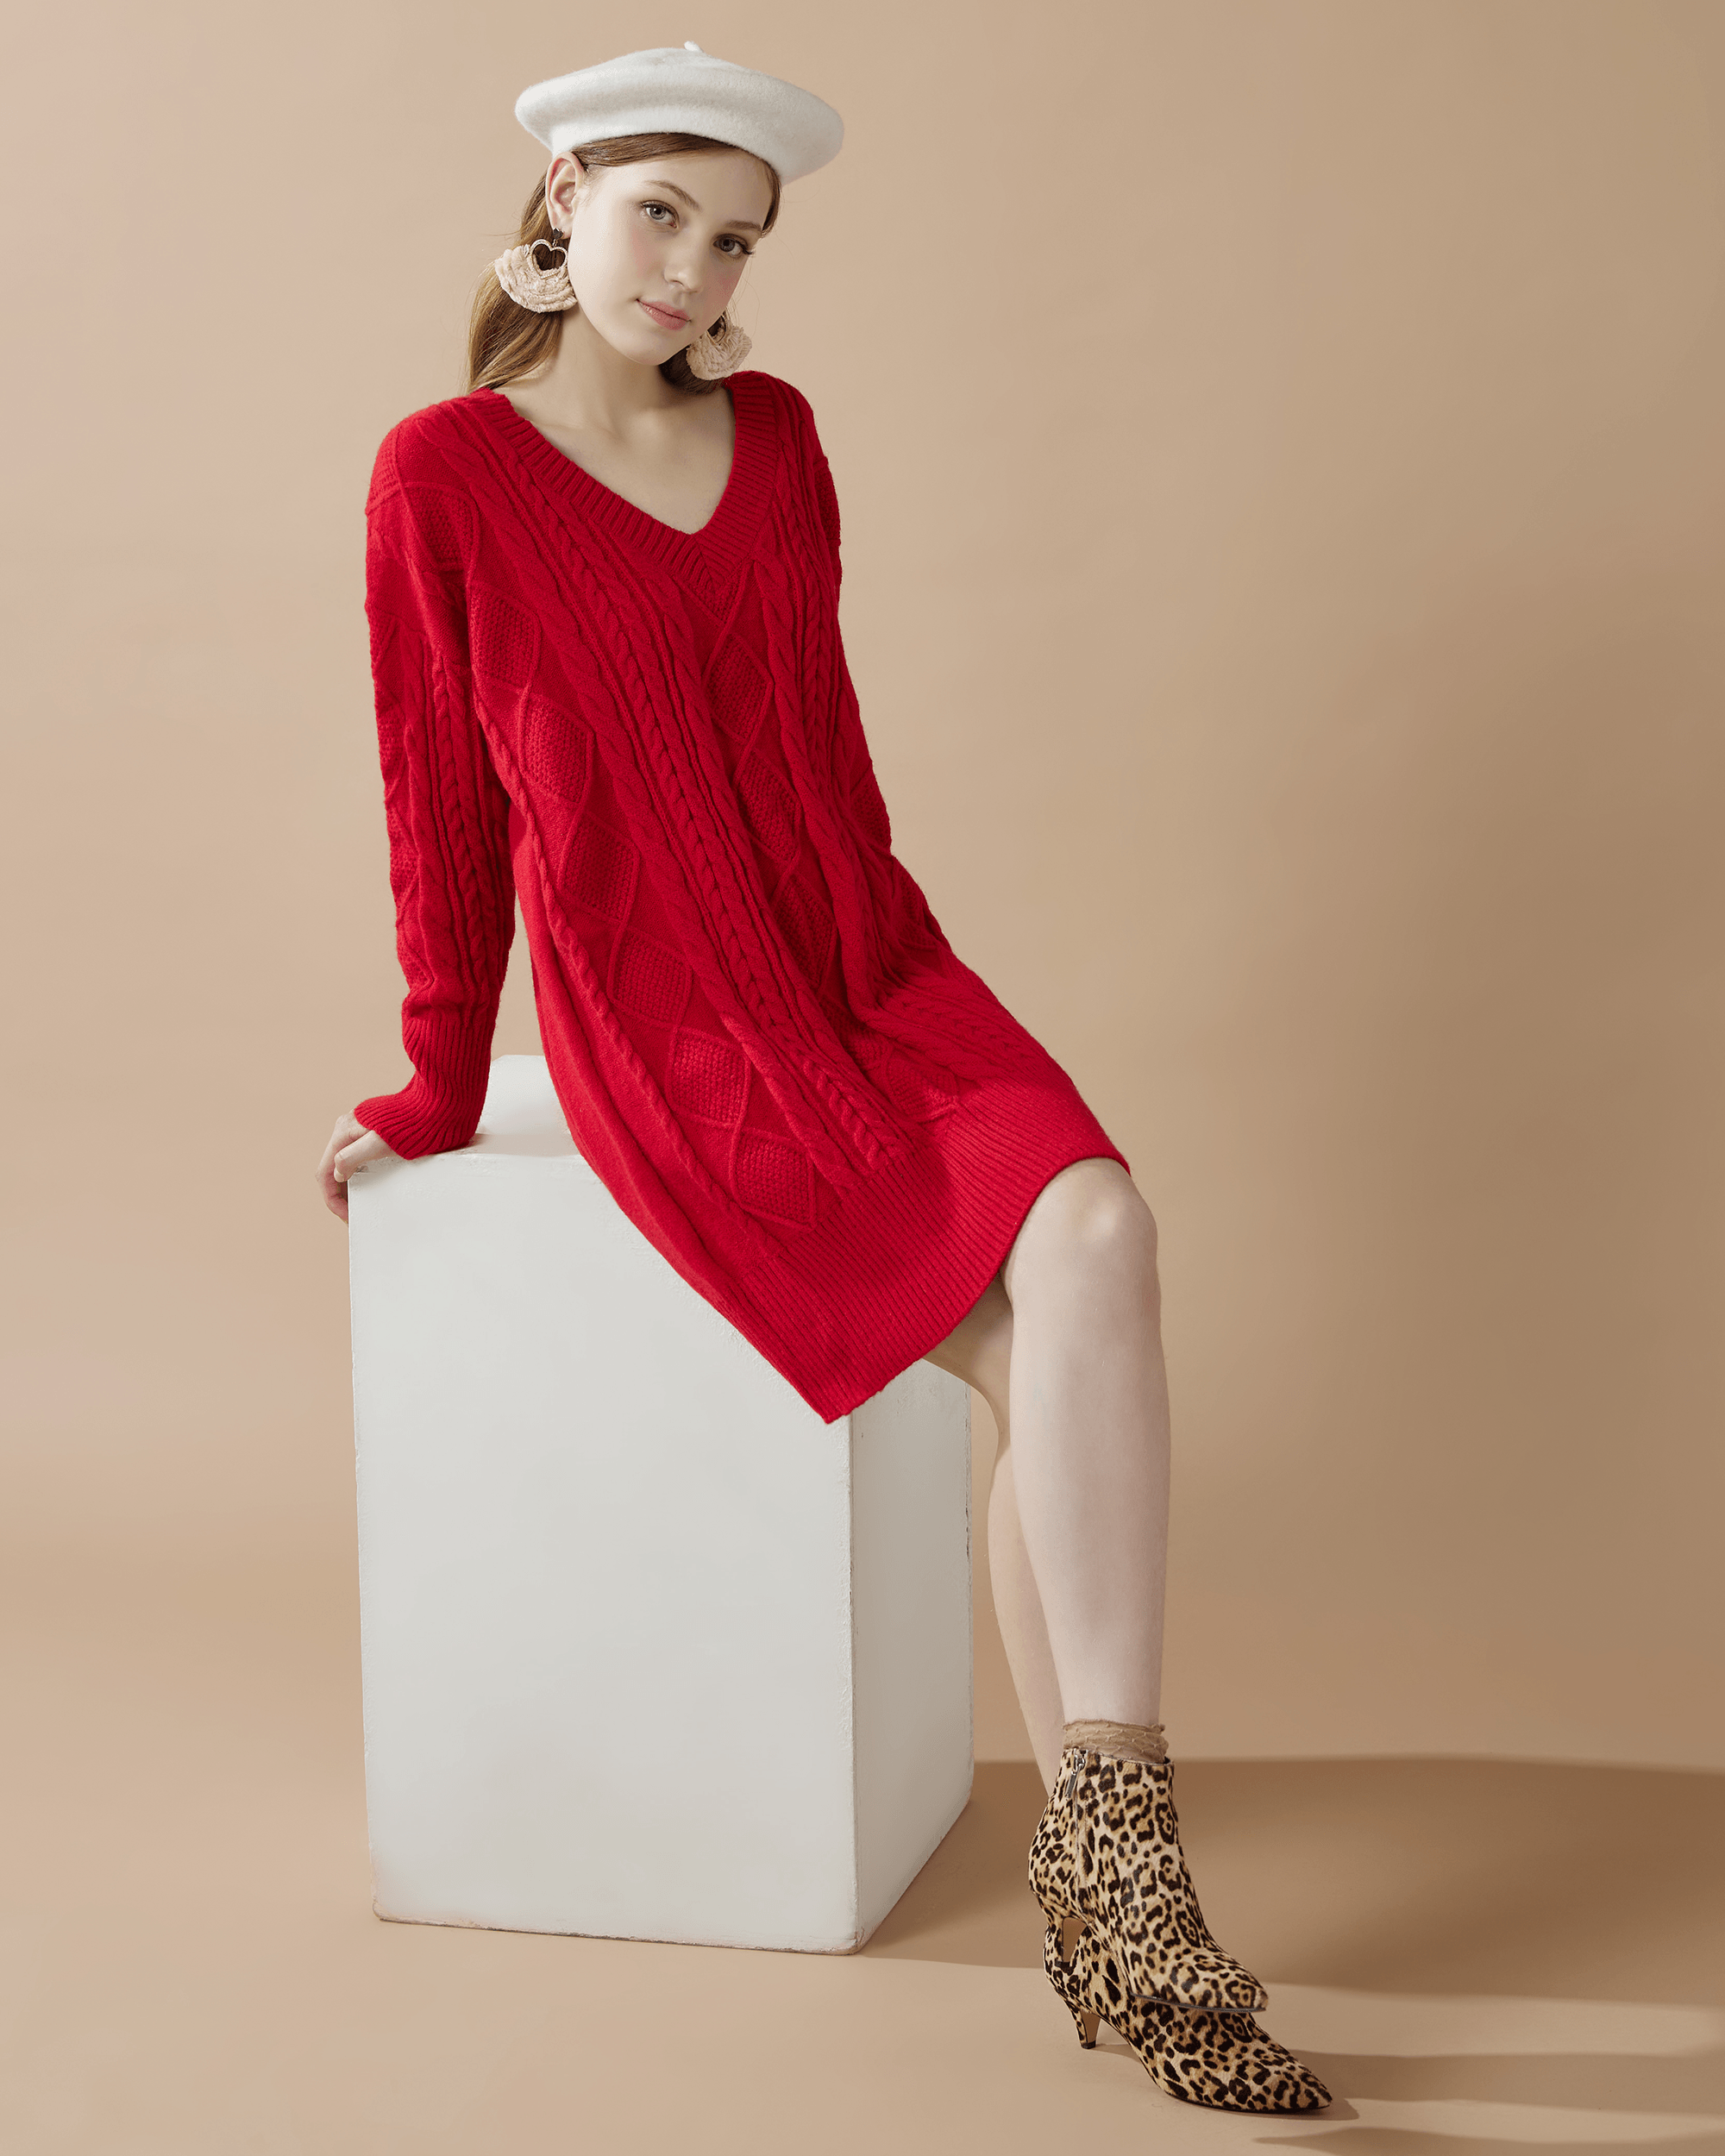 V-Neck Cable Knit Sweater Dress - Red